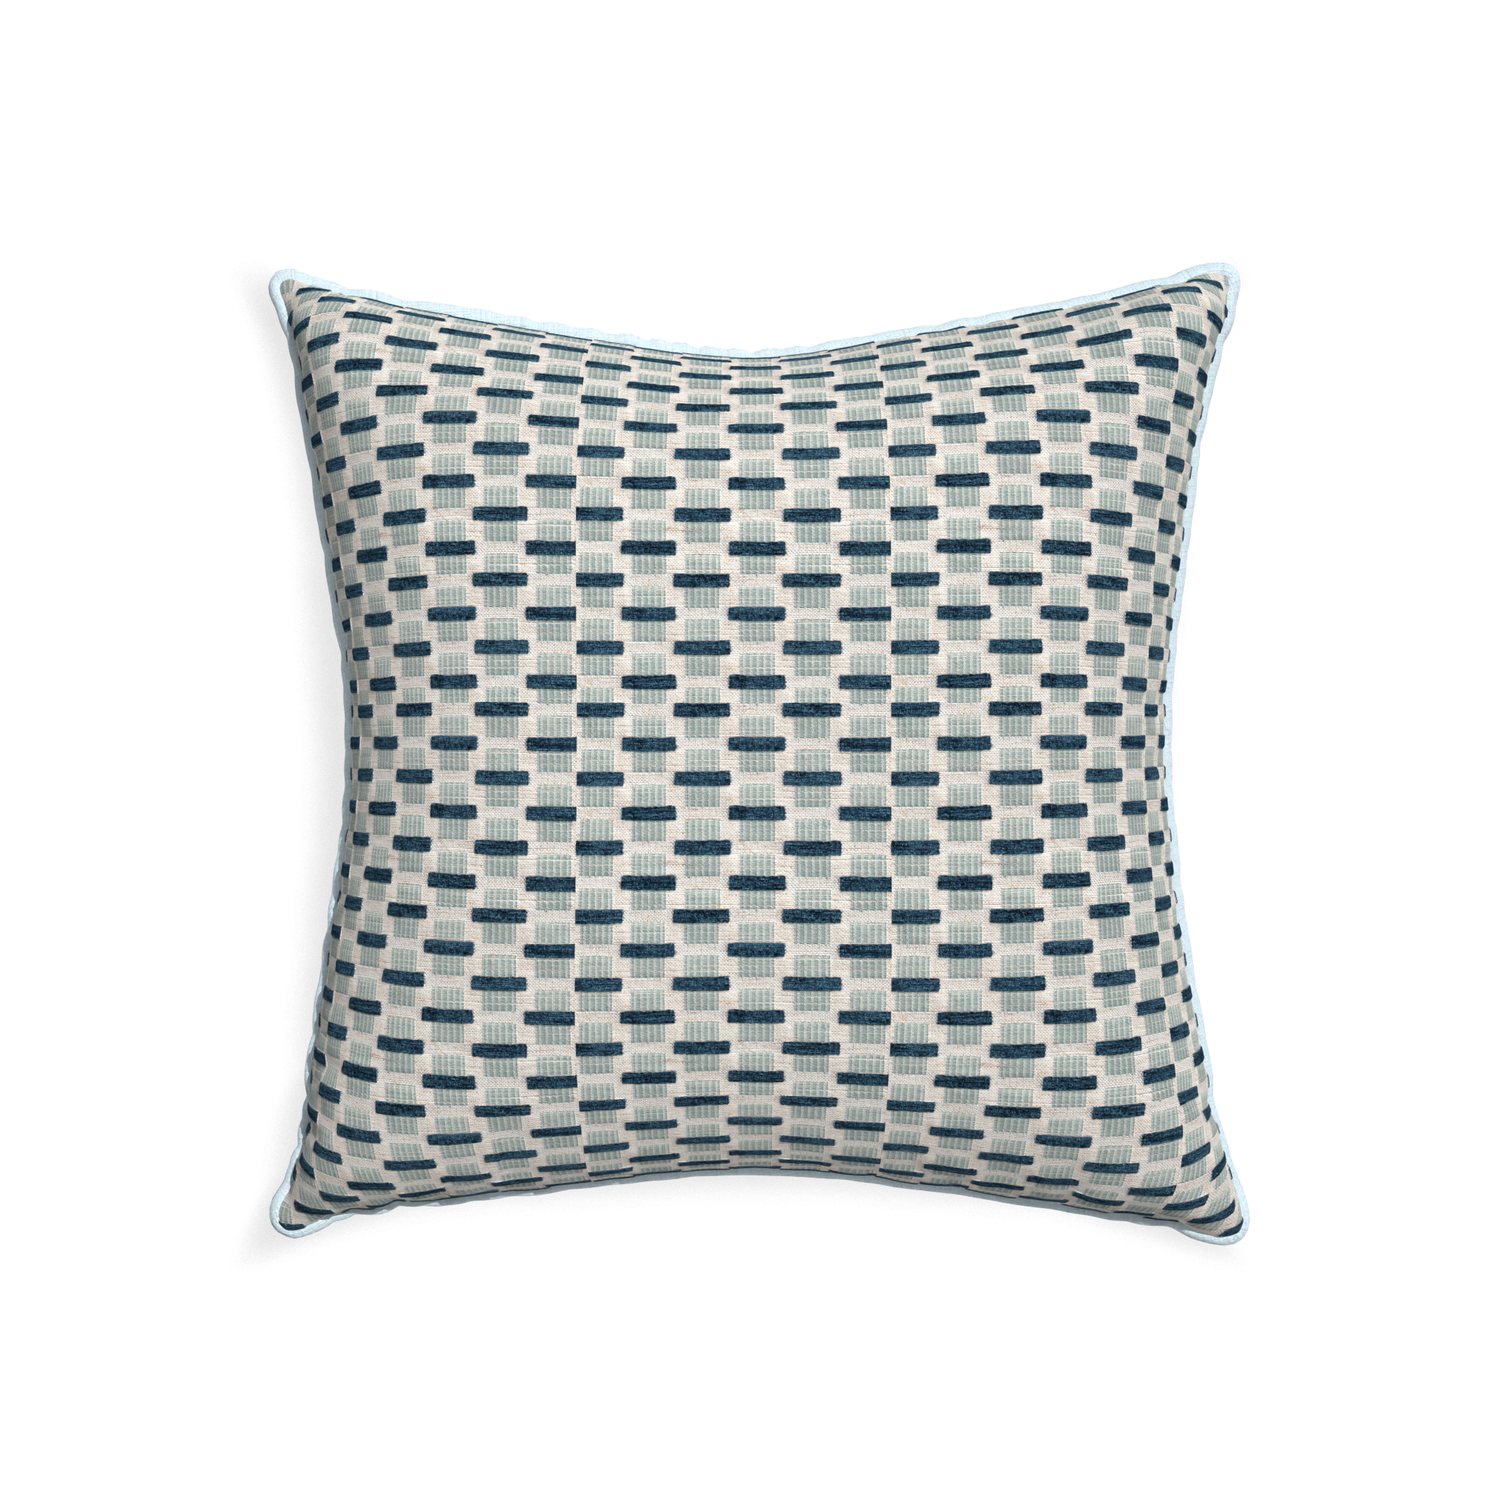 22-square willow amalfi custom blue geometric chenillepillow with powder piping on white background